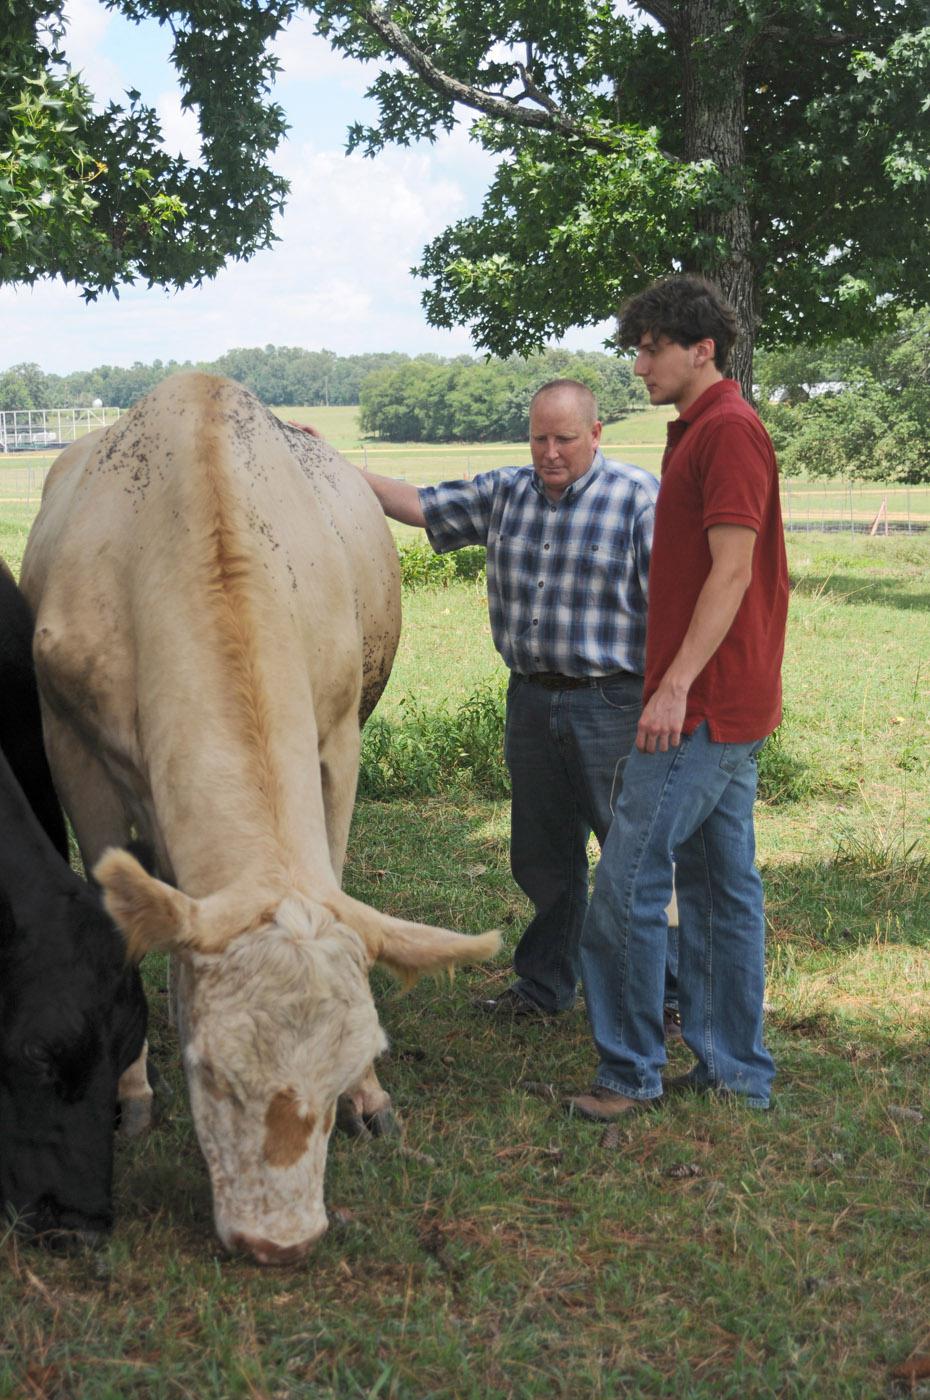 Mississippi State University animal scientist Brian Rude, left, and graduate student Jonathan Greene of Trussville, Ala., feed Peaches the steer a ration containing refined distillers grains. The two studied the ability of cattle to digest this substance. (Photo by Kat Lawrence)